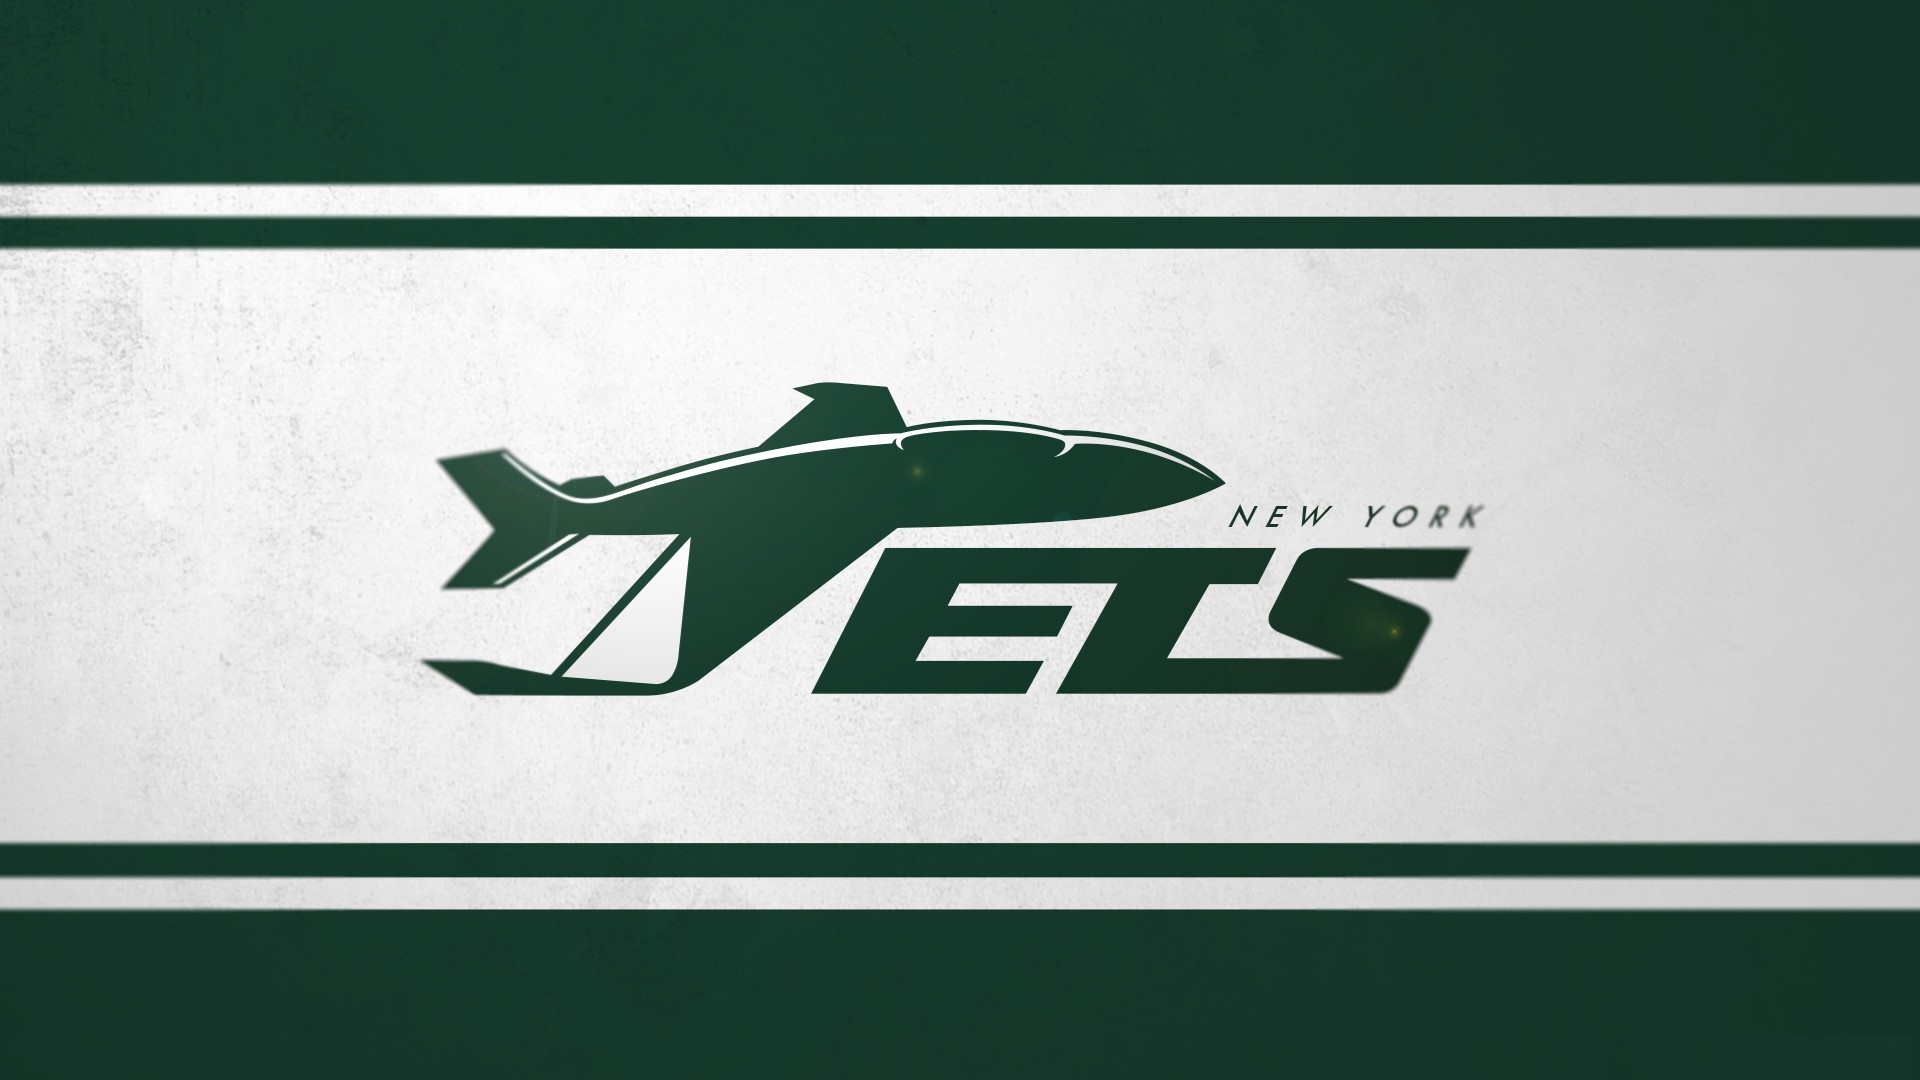 Wallpapers HD New York Jets - 2022 NFL Football Wallpapers.